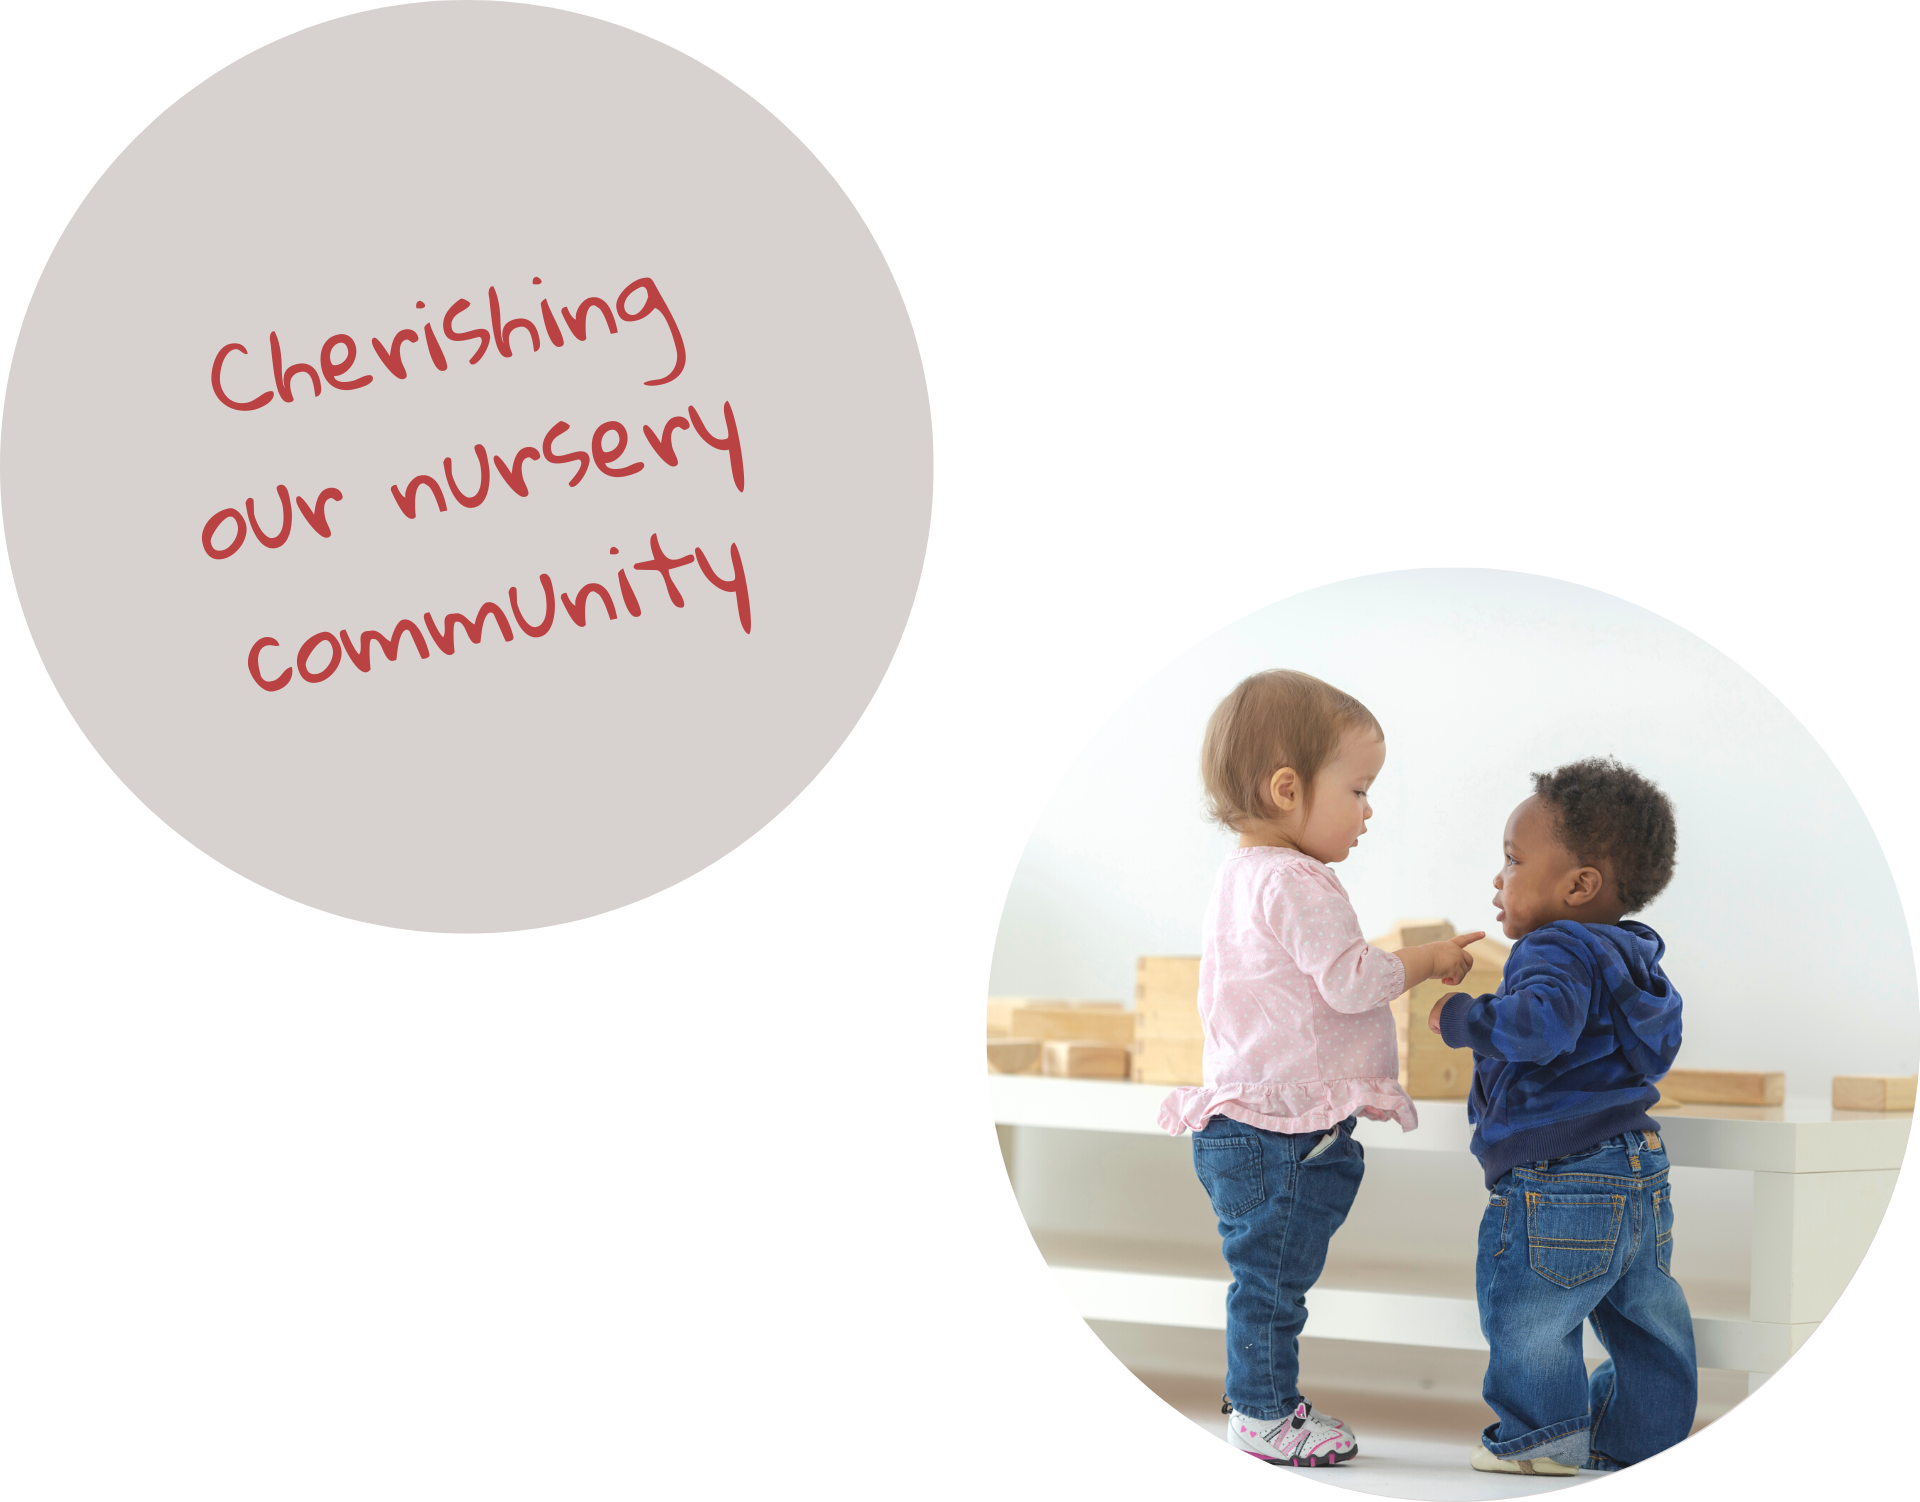 Two circular images of the text "Cherishing our nursery community" and two toddlers who are playing with each other. 